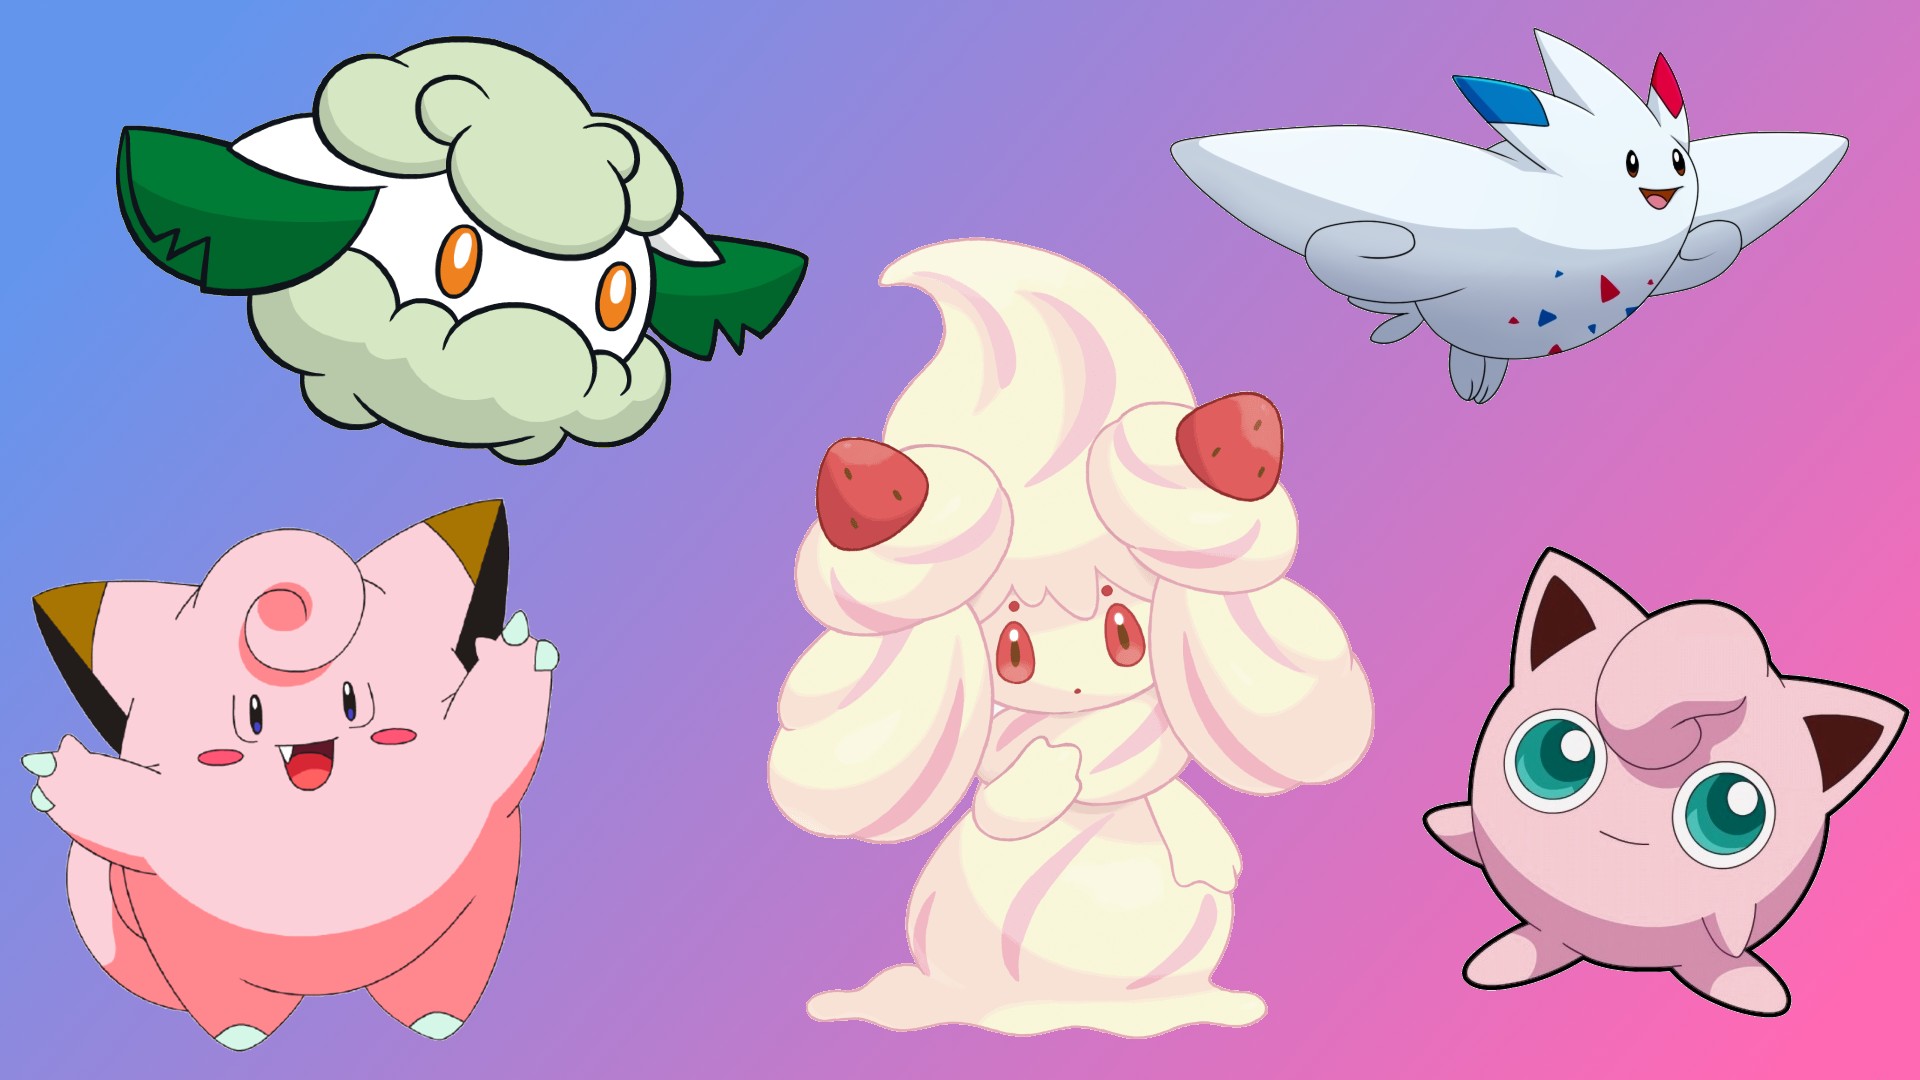 What are Psychic-types weak against in Pokemon GO?